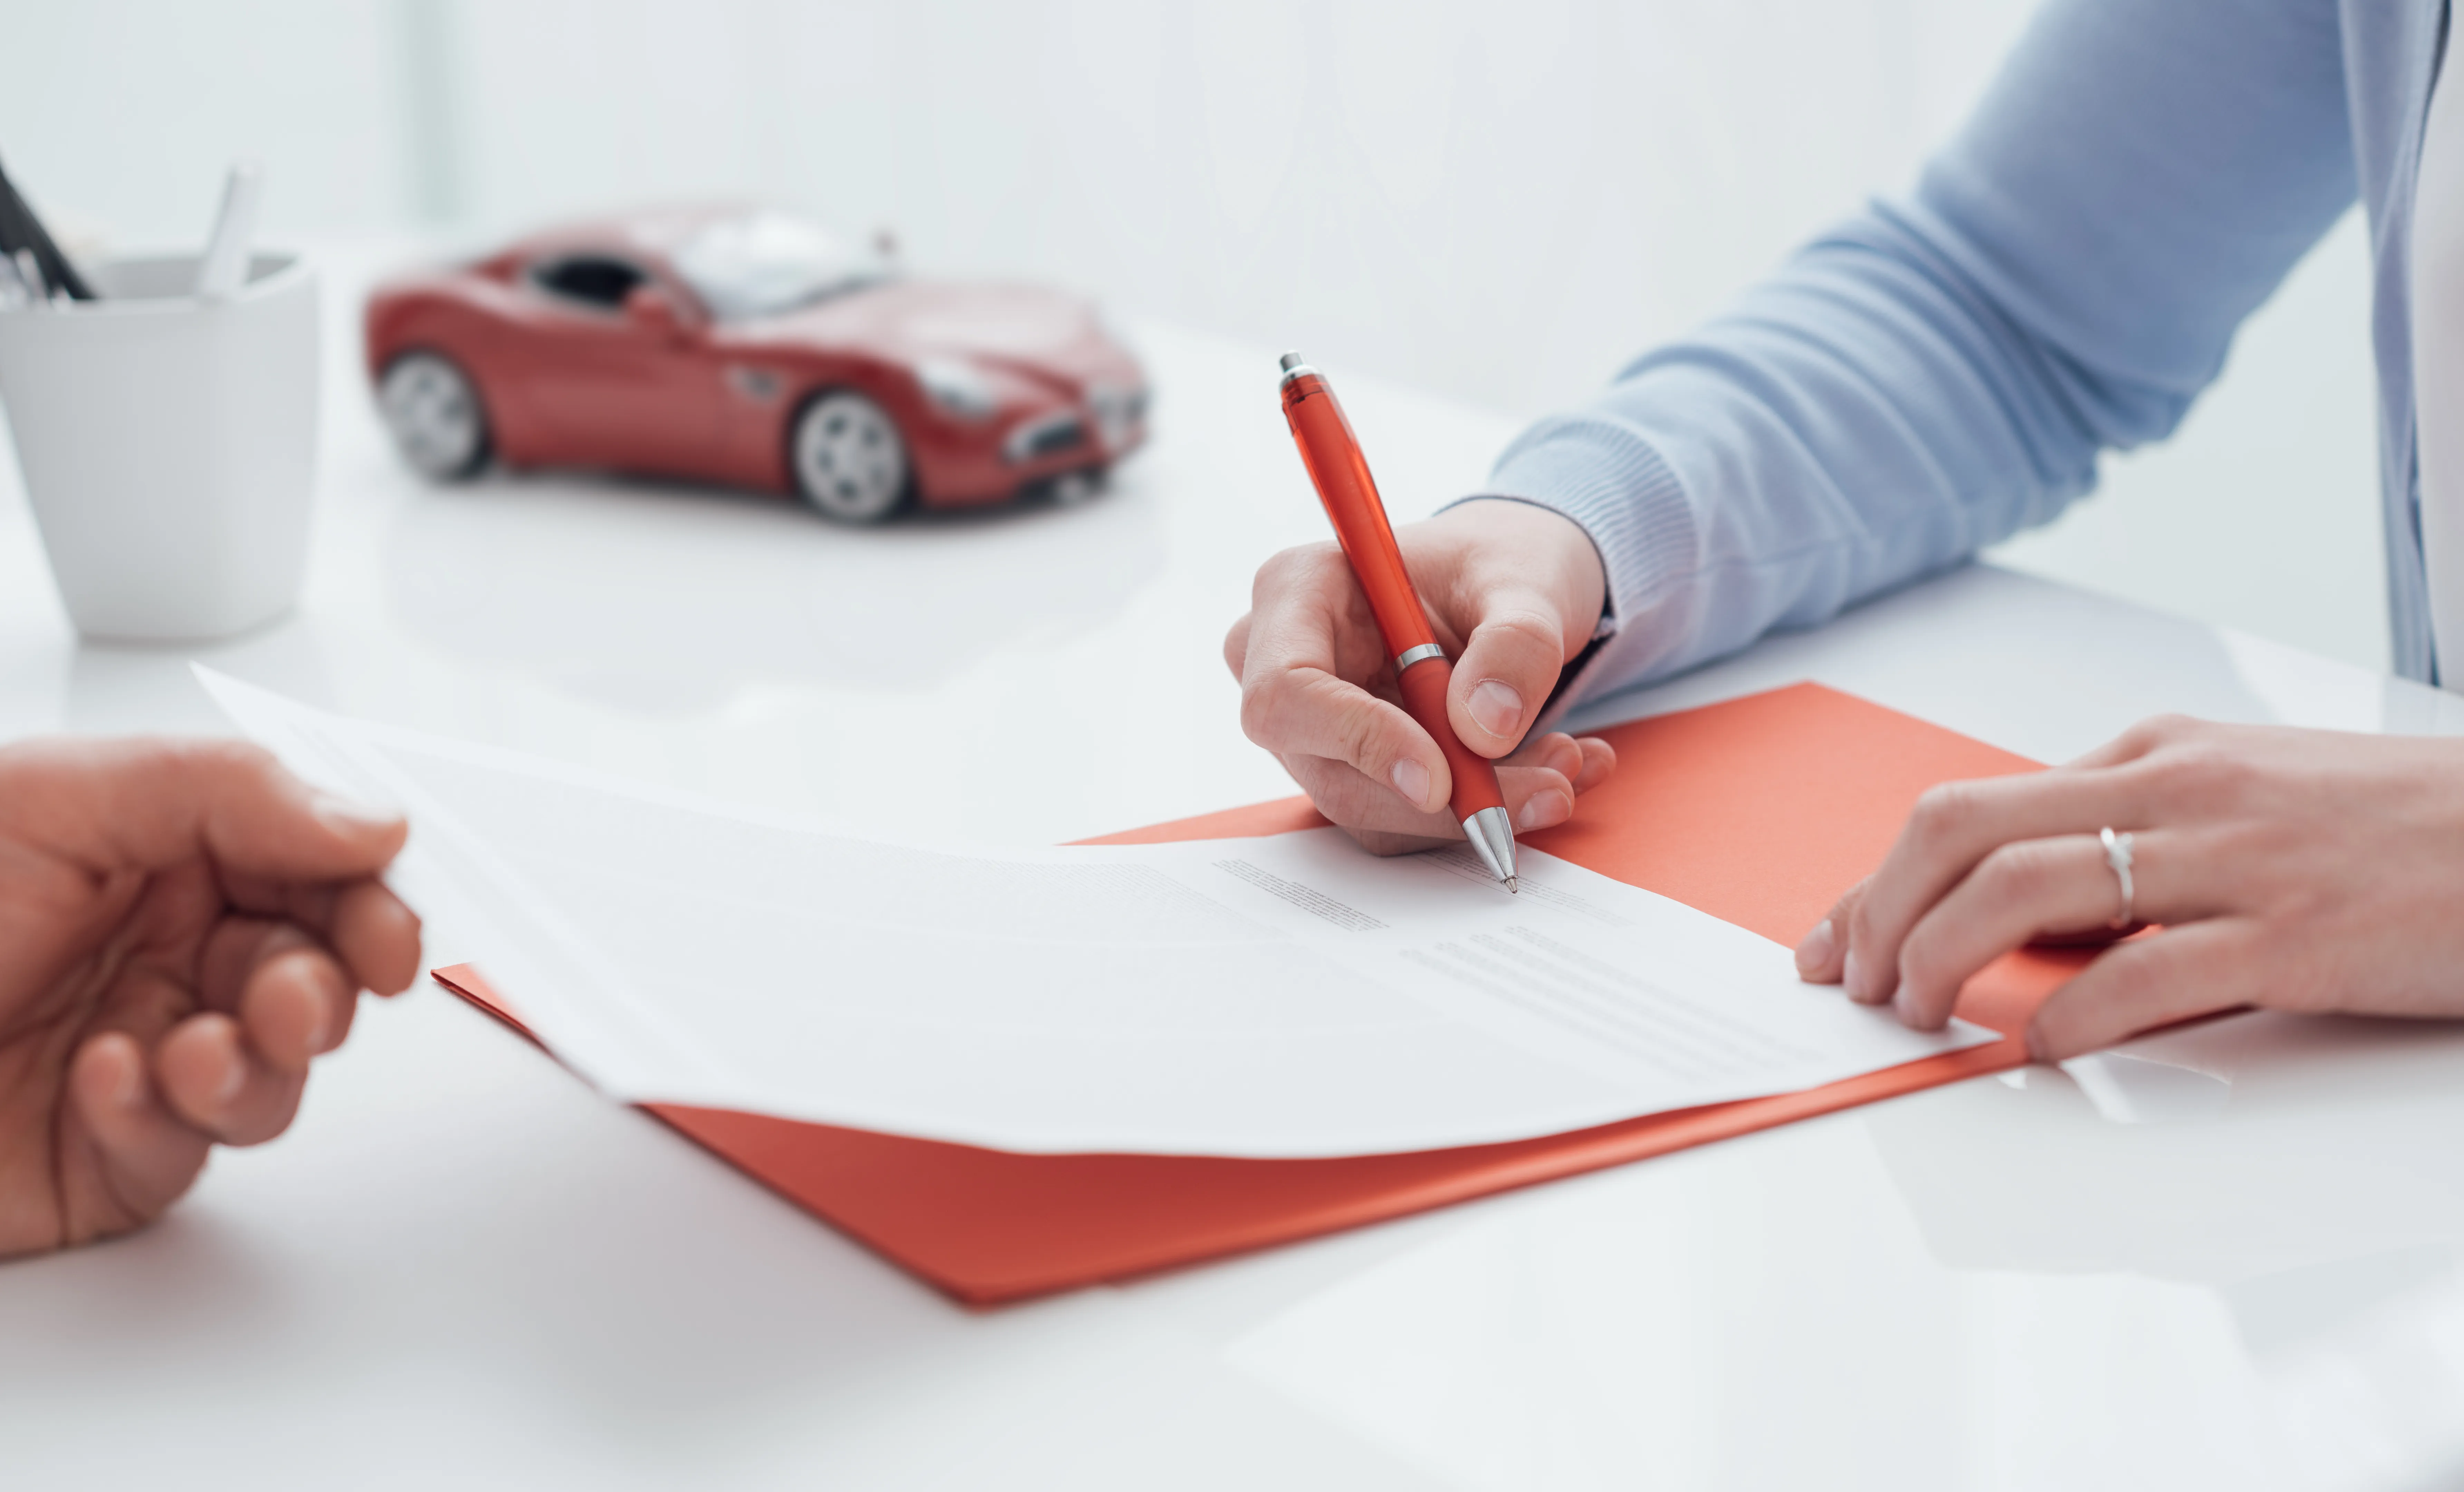 What You Should Know About Bad Credit Car Loans